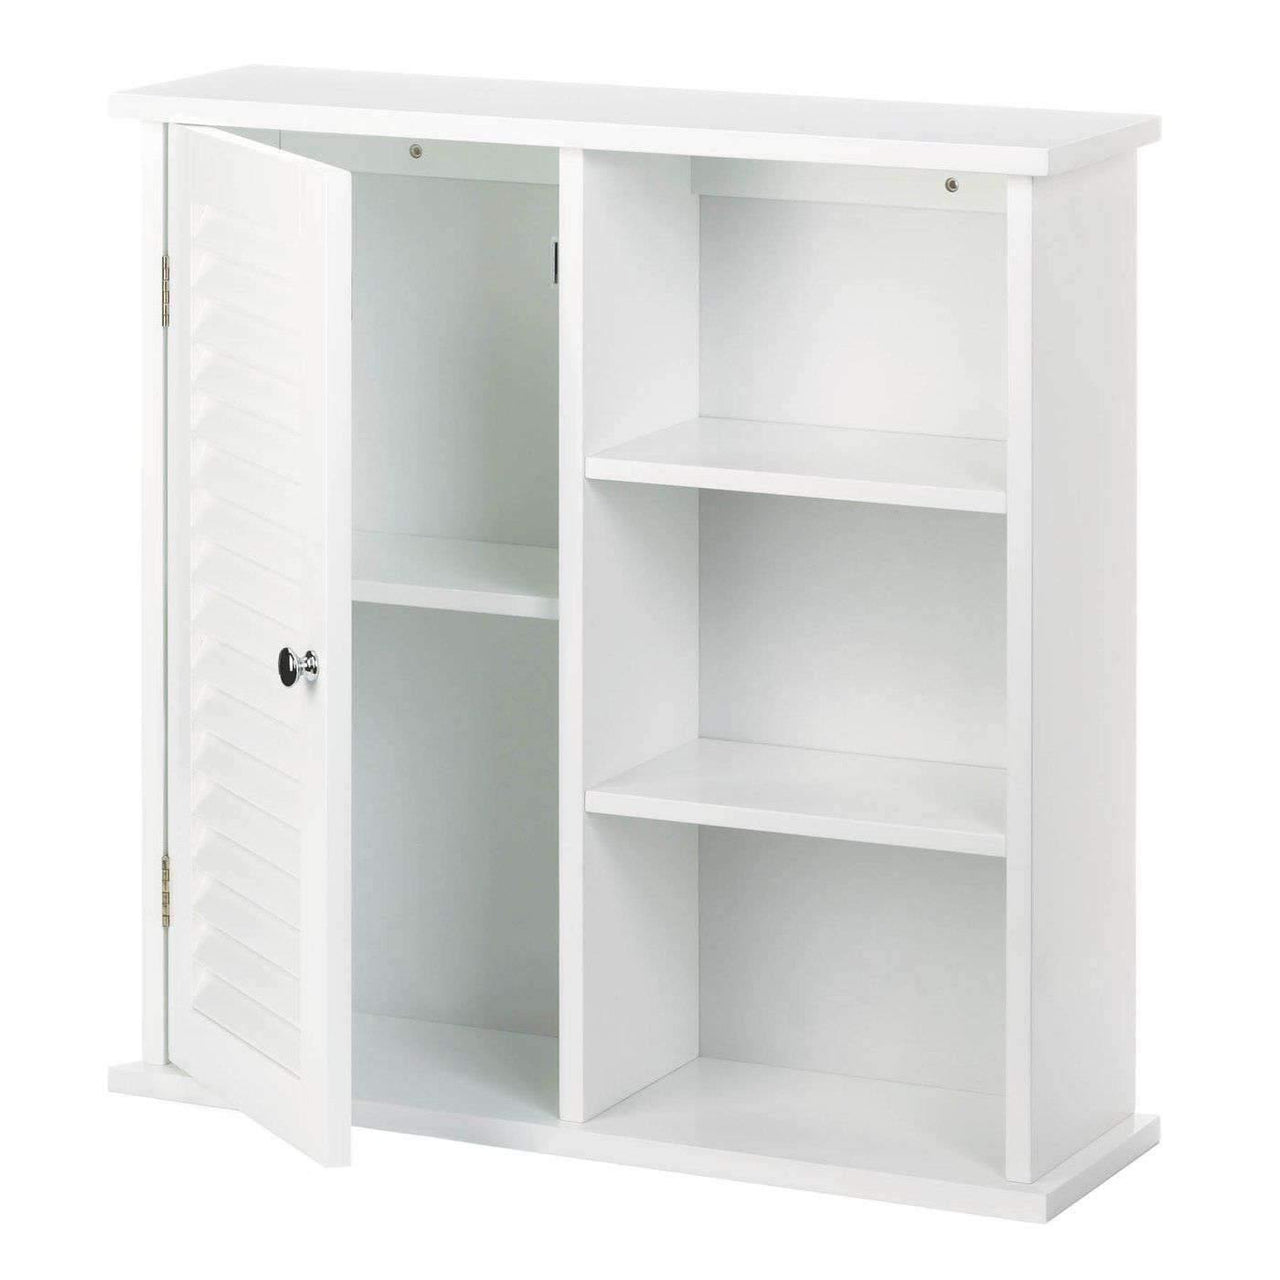 White Wall Cabinet With Shelves - The Fox Decor